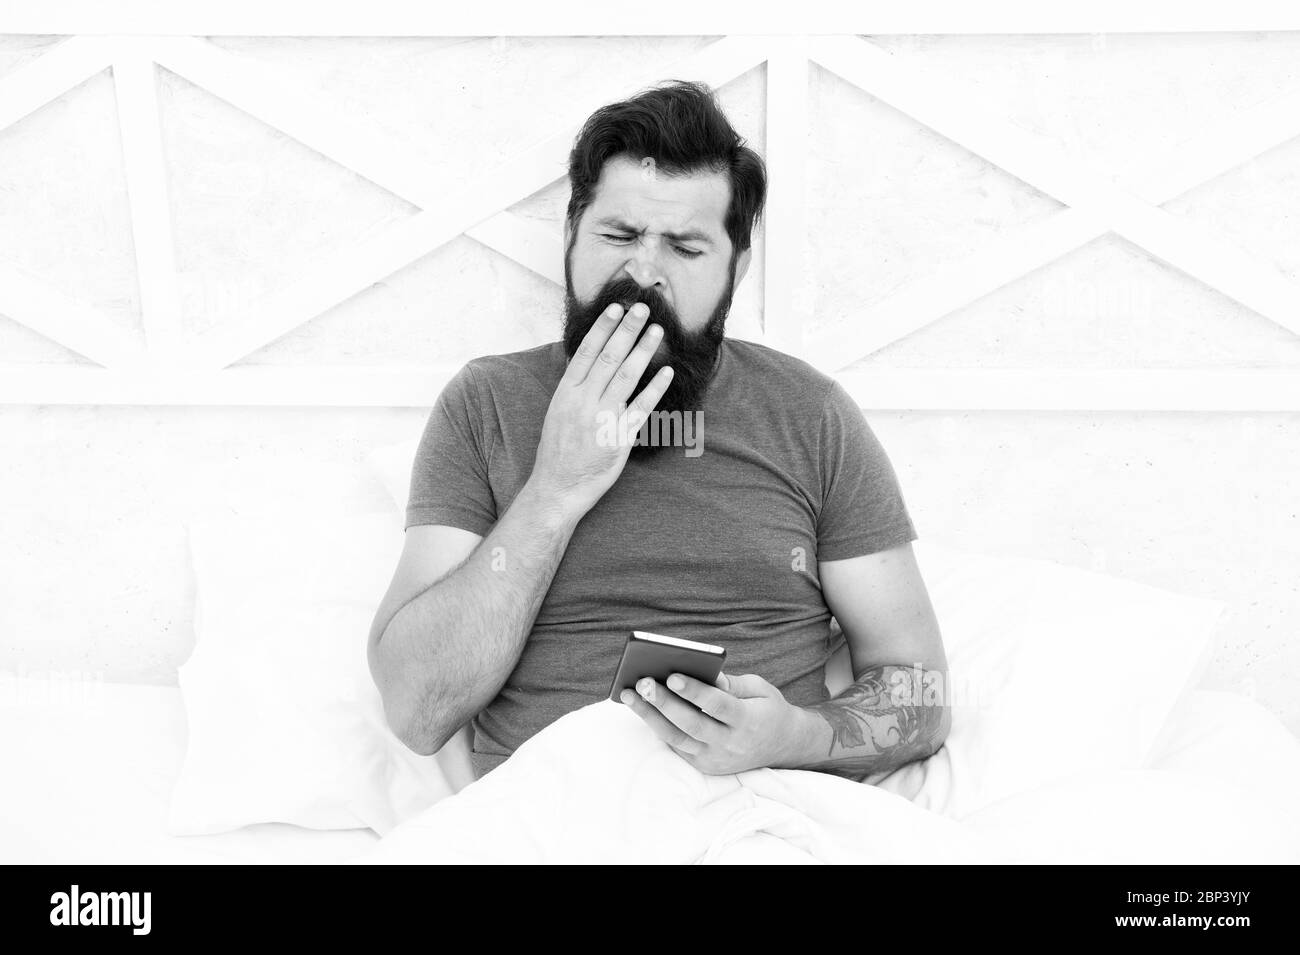 It takes him long to wake up. Sleepy man. Bearded man use mobile phone in bed. Man yawn in morning. Unshaven man with beard and mustache hair. Mobile lifestyle. Waking up. Good morning. Stock Photo